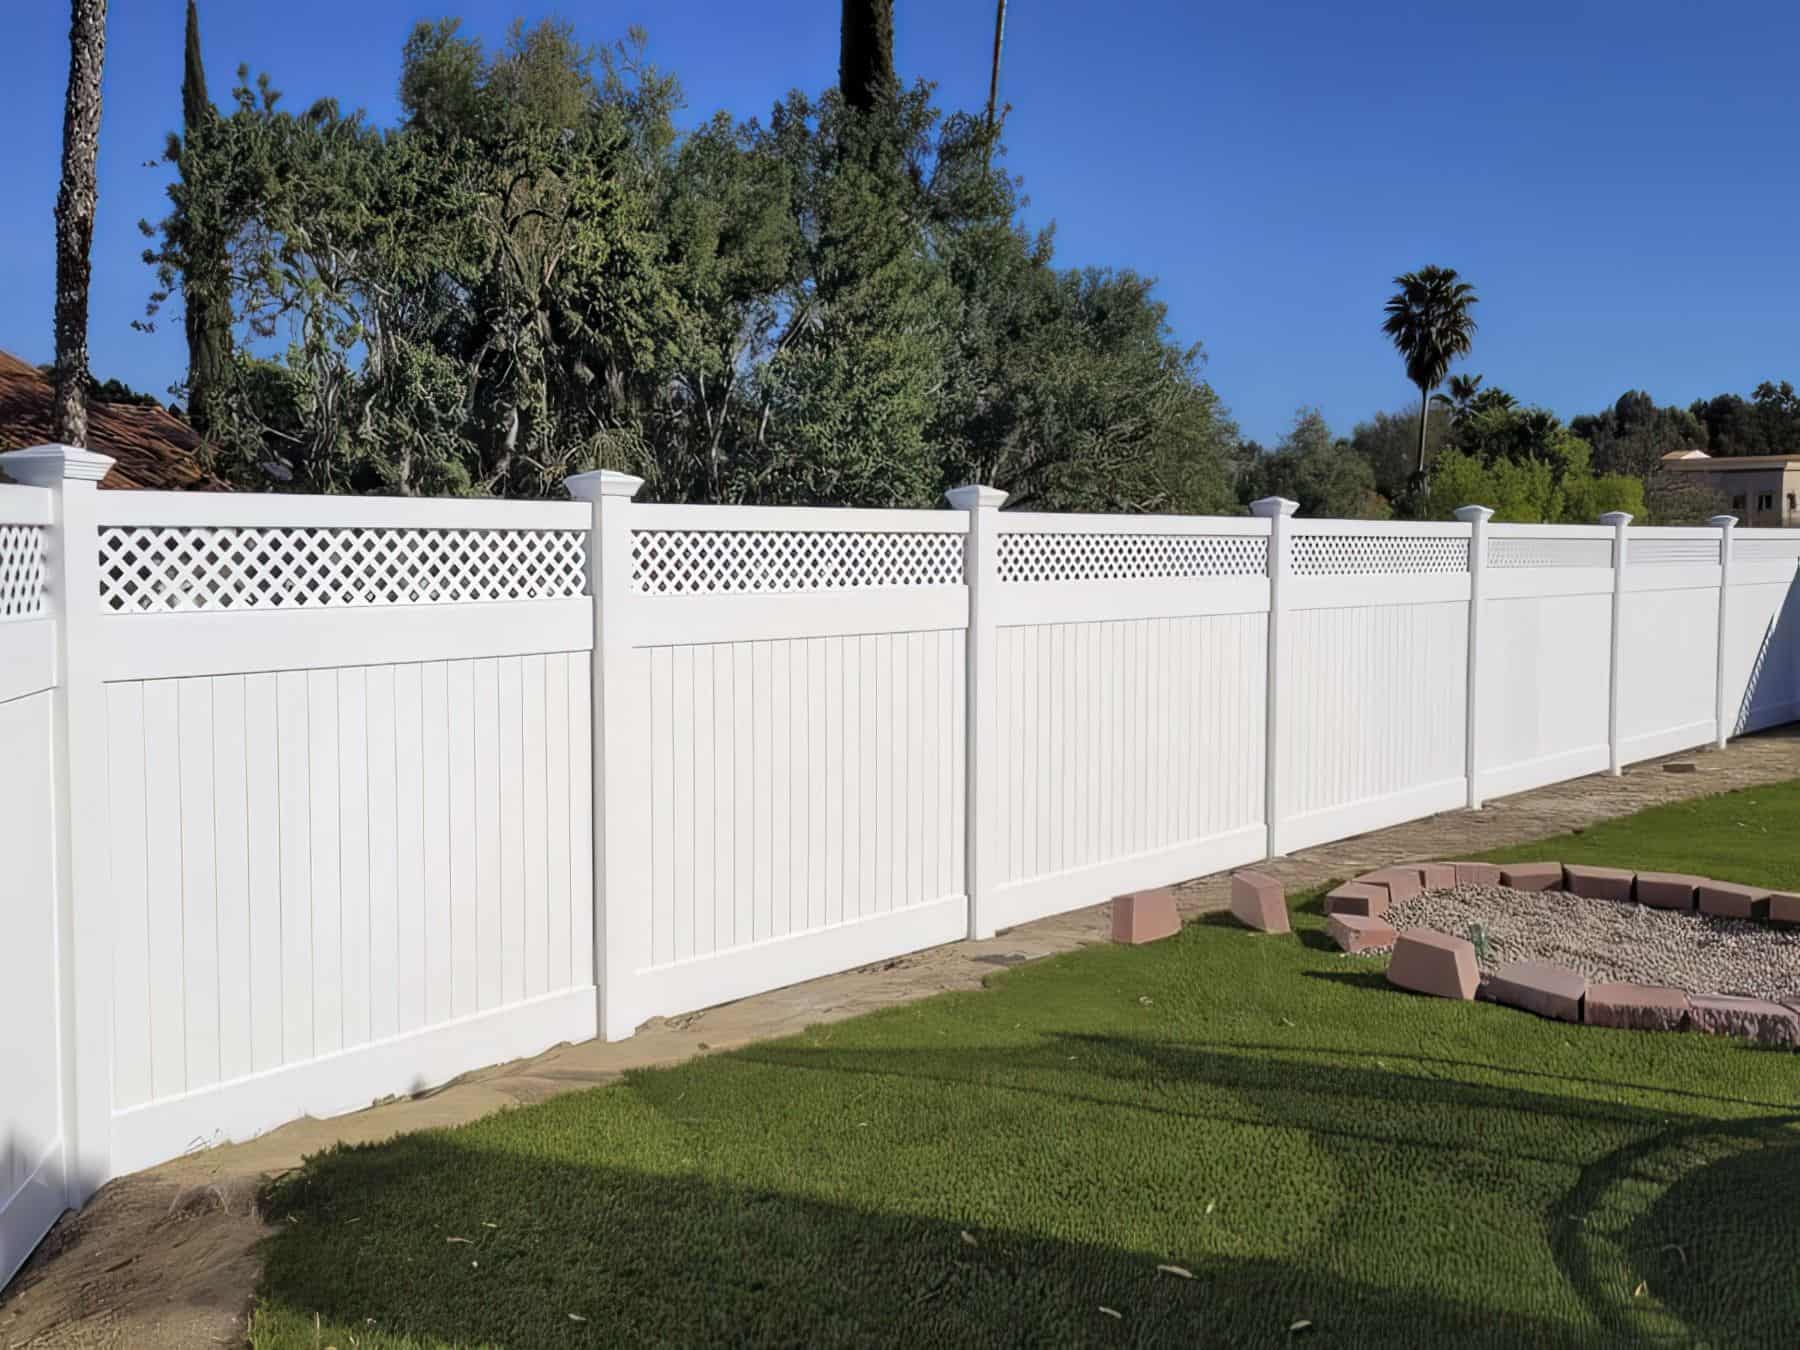 Vinyl pool fence surrounding backyard of suburban home with granite floors, grassy lawn, palm trees, and comfortable couches